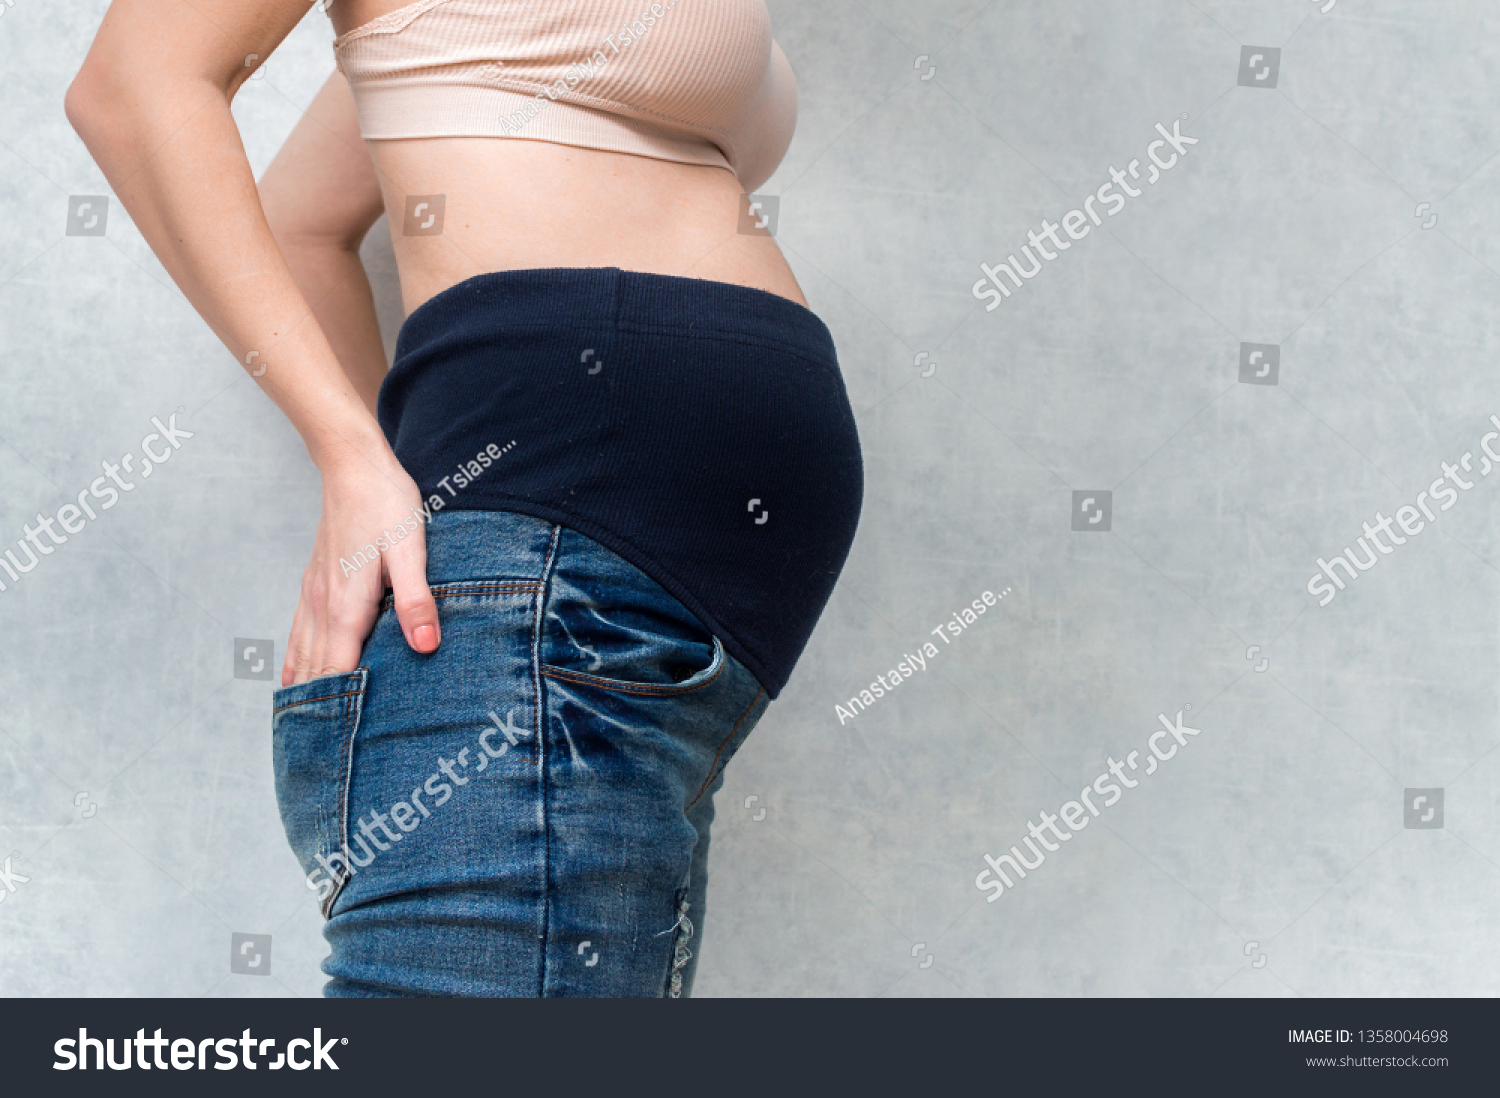 Pregnant woman in maternity pants. Pants with a rubber band on the abdomen. Belly closeup. Gray background. Free space #1358004698